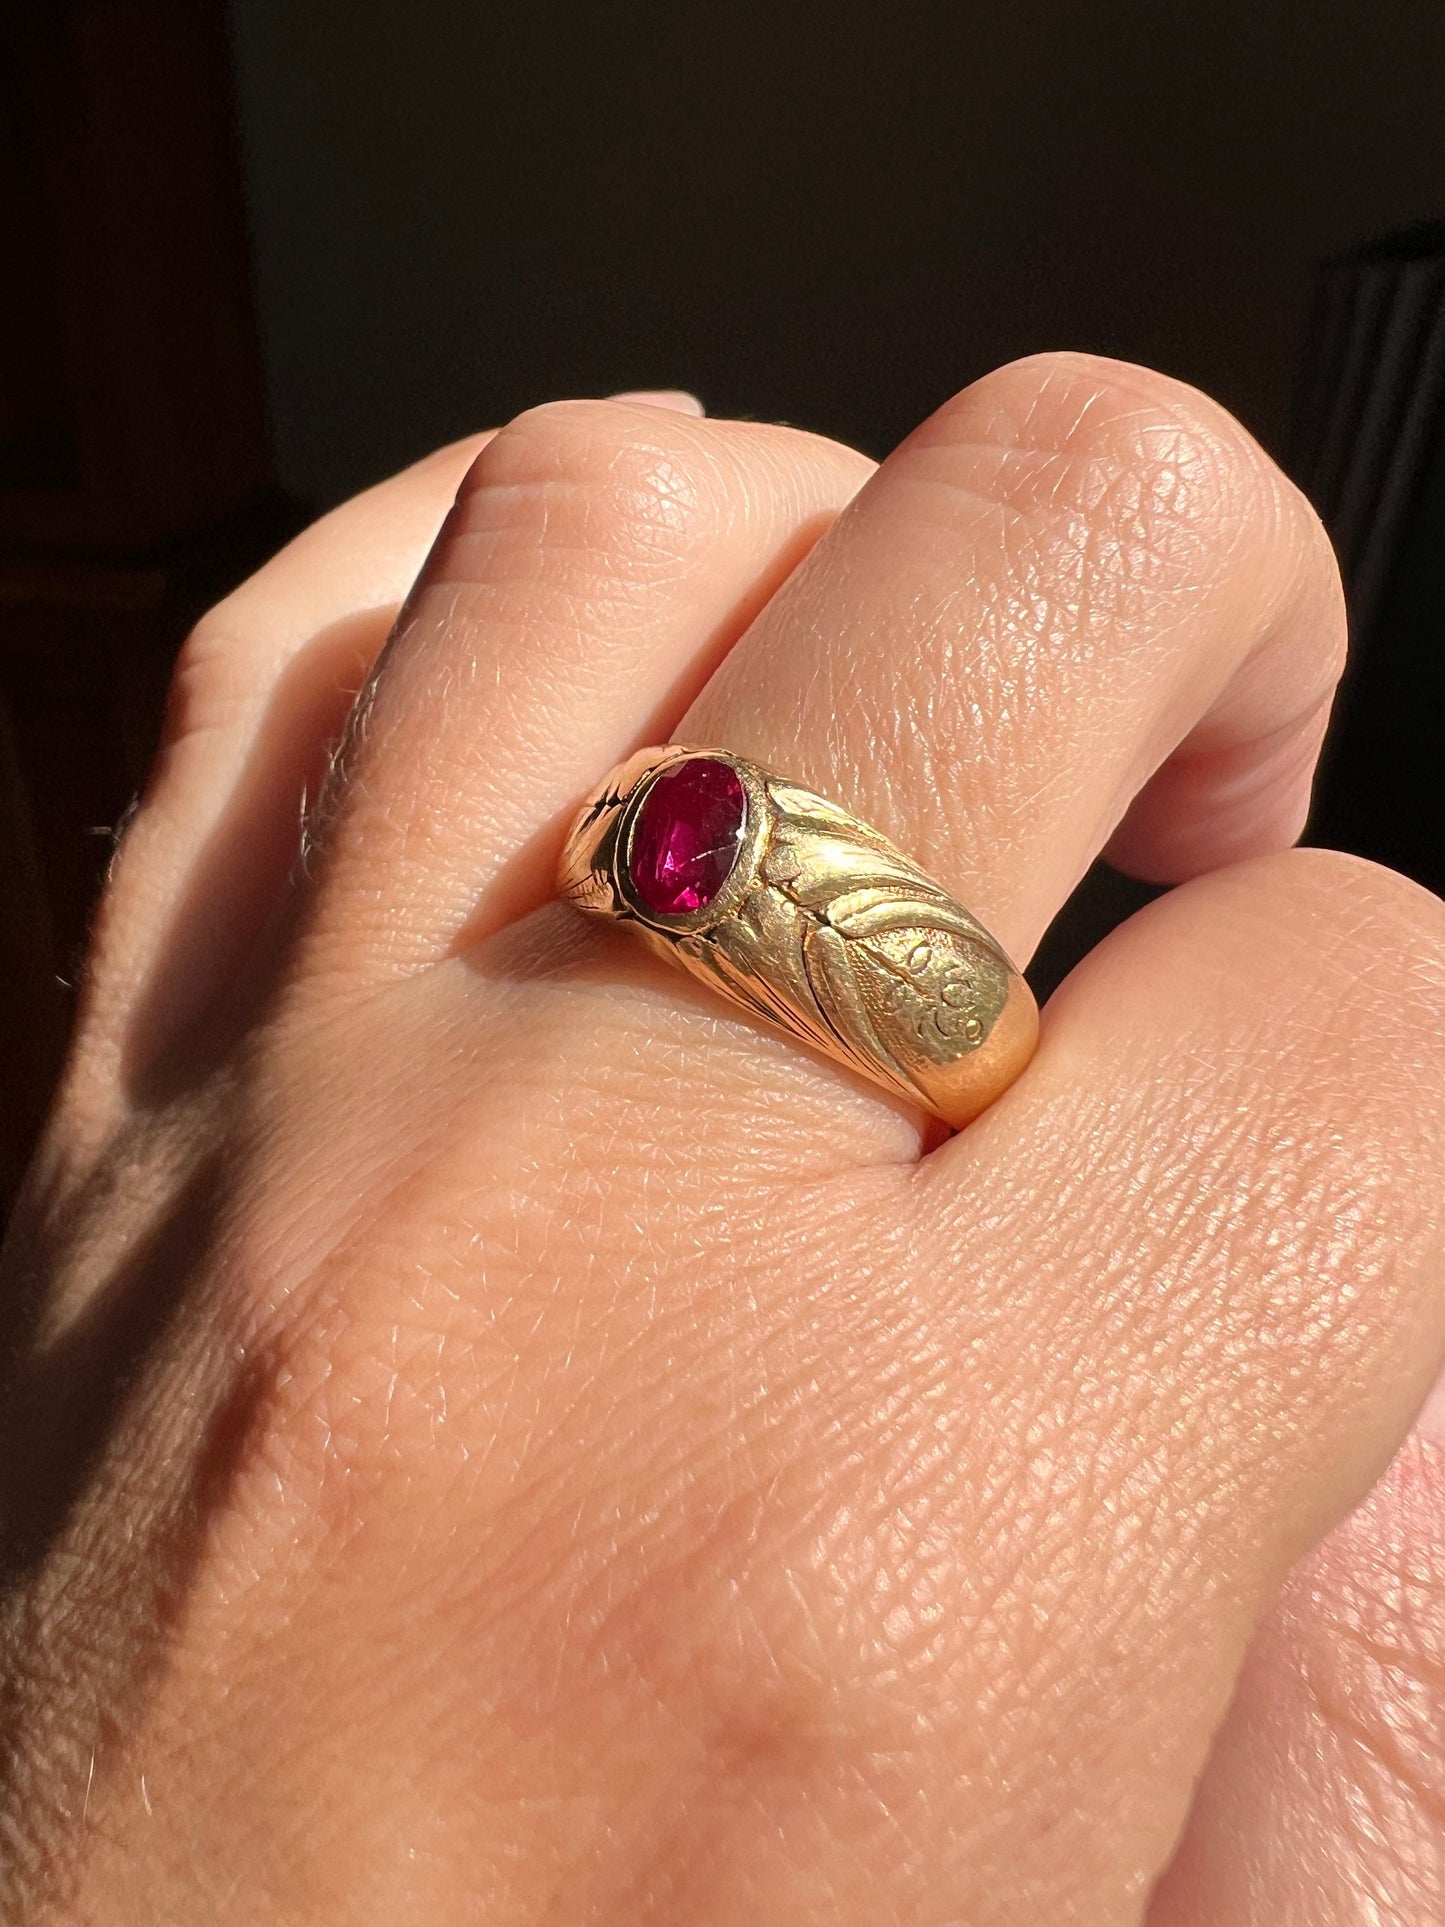 Heavy French Antique 8g 18k Gold Angled RUBY Gypsy Wide Band Ring Floral Leaf Chunky Victorian Belle Epoque Art Nouveau Unisex Man Pink